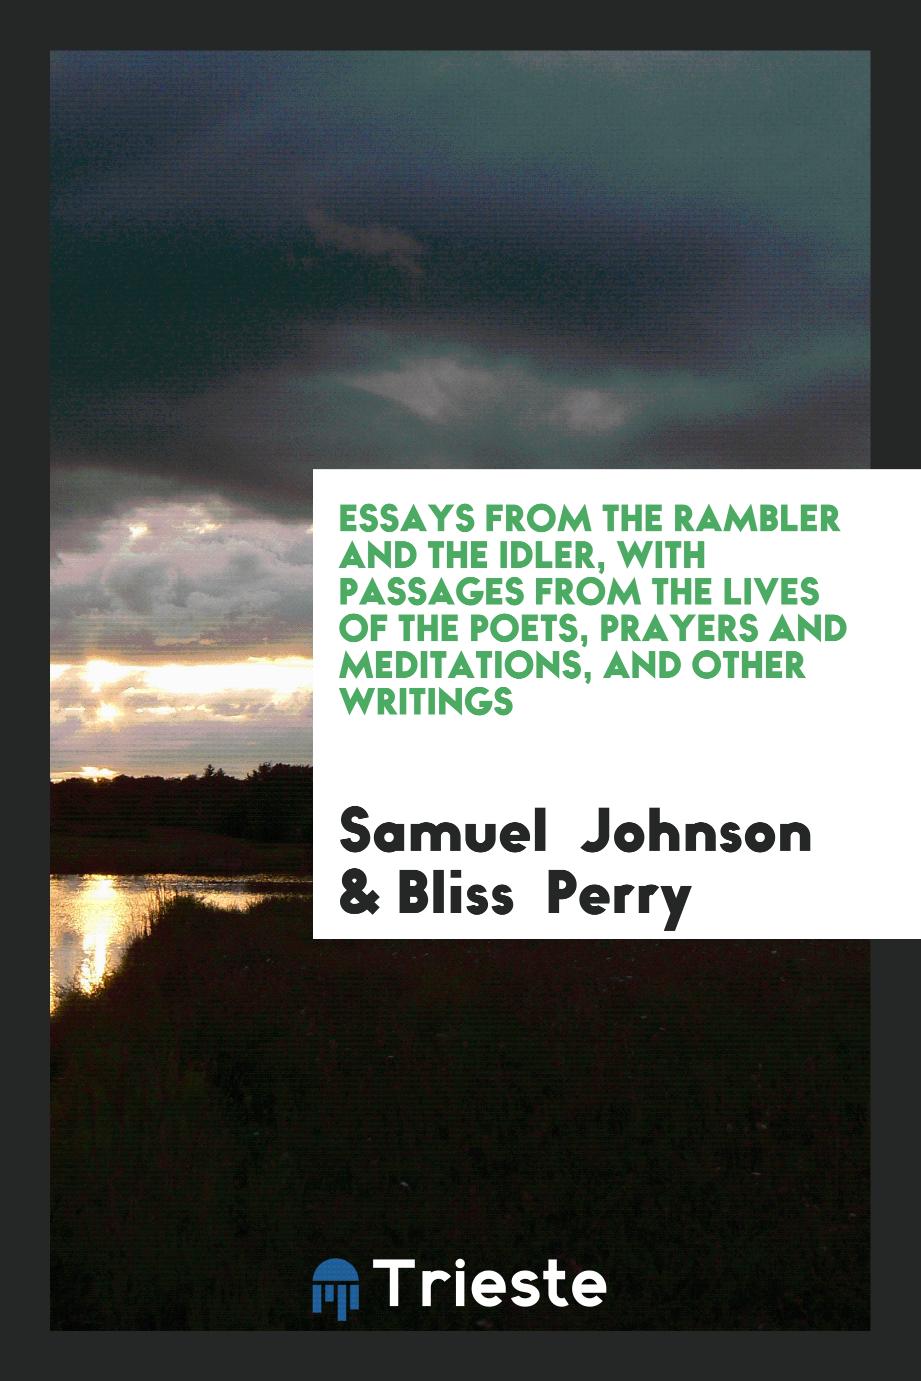 Essays from the Rambler and the Idler, with Passages from the Lives of the Poets, Prayers and Meditations, and Other Writings